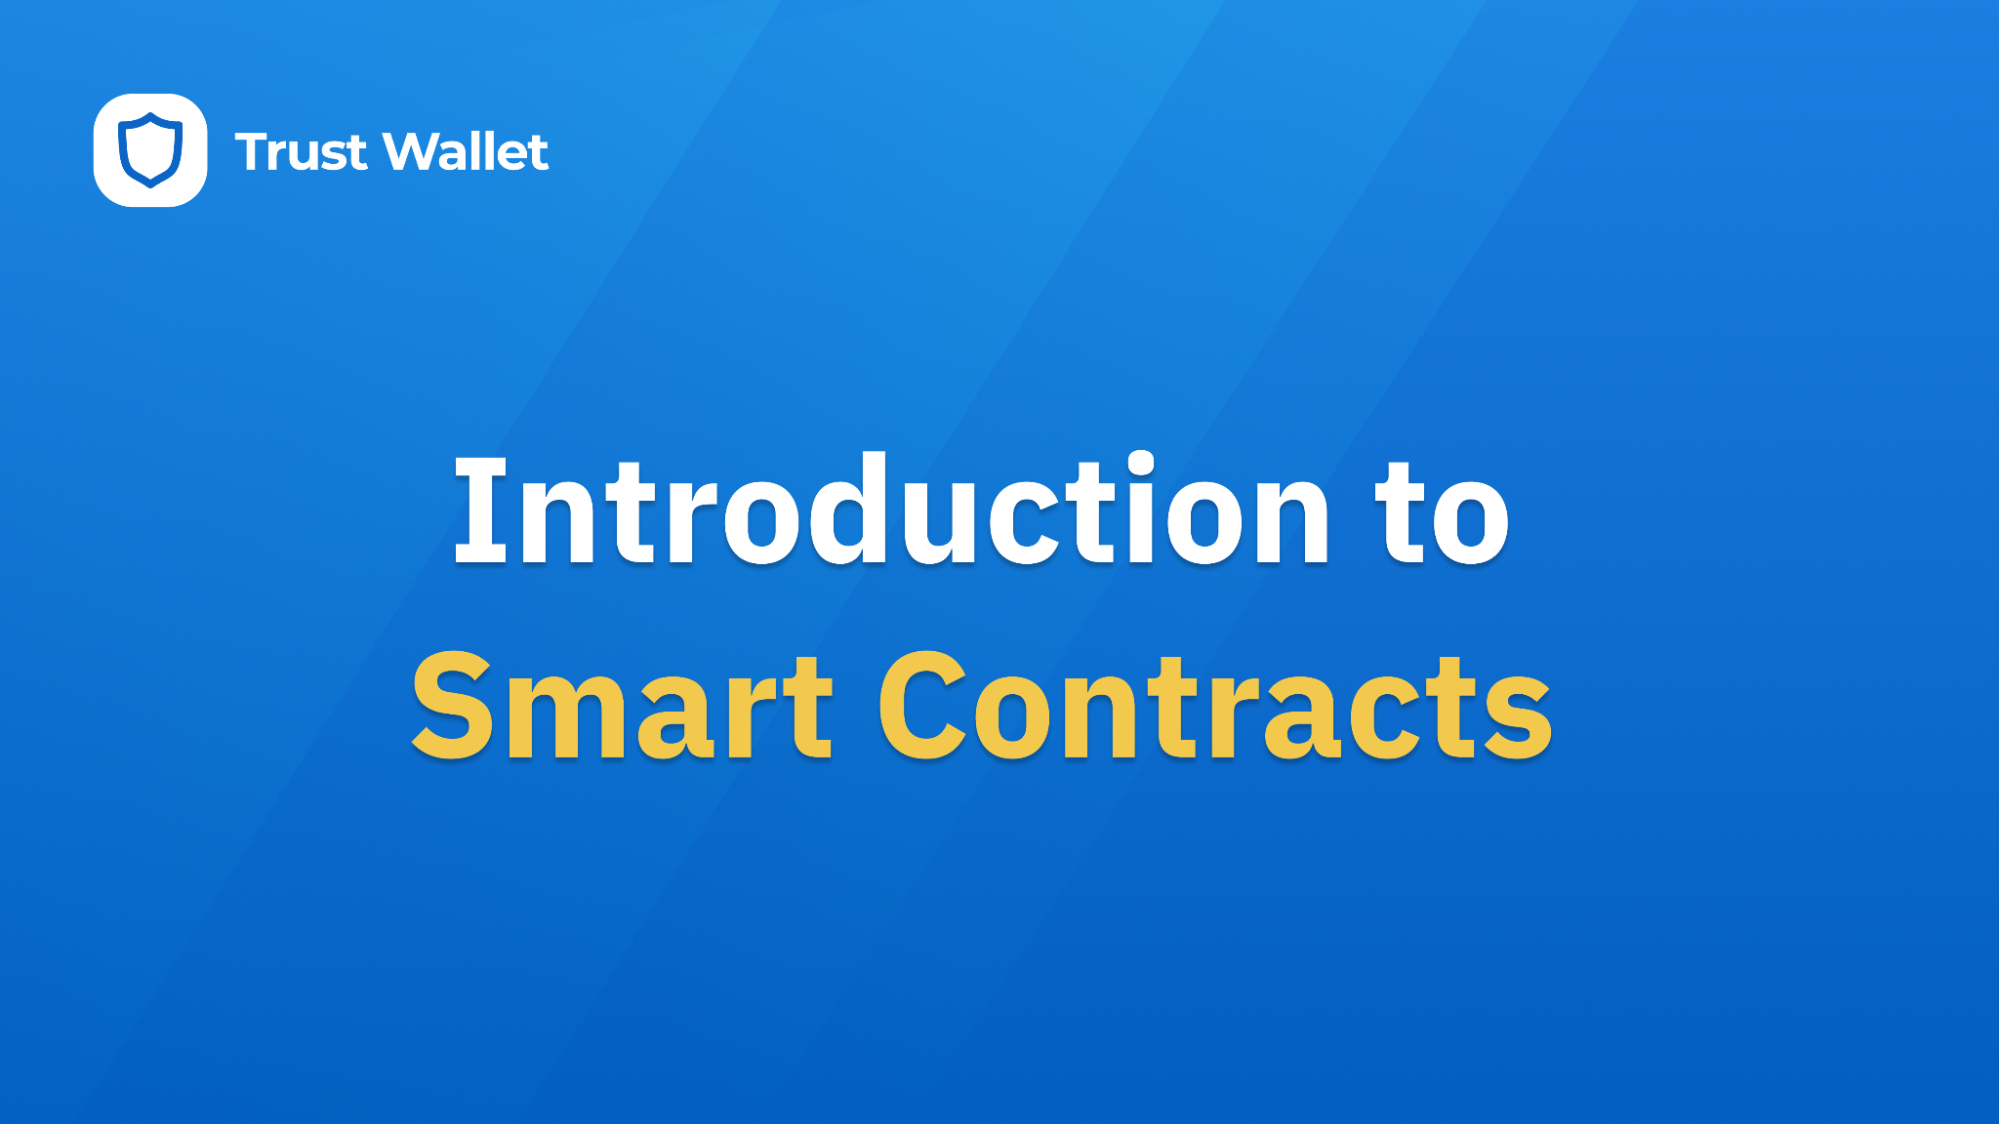 Introduction to Smart Contracts